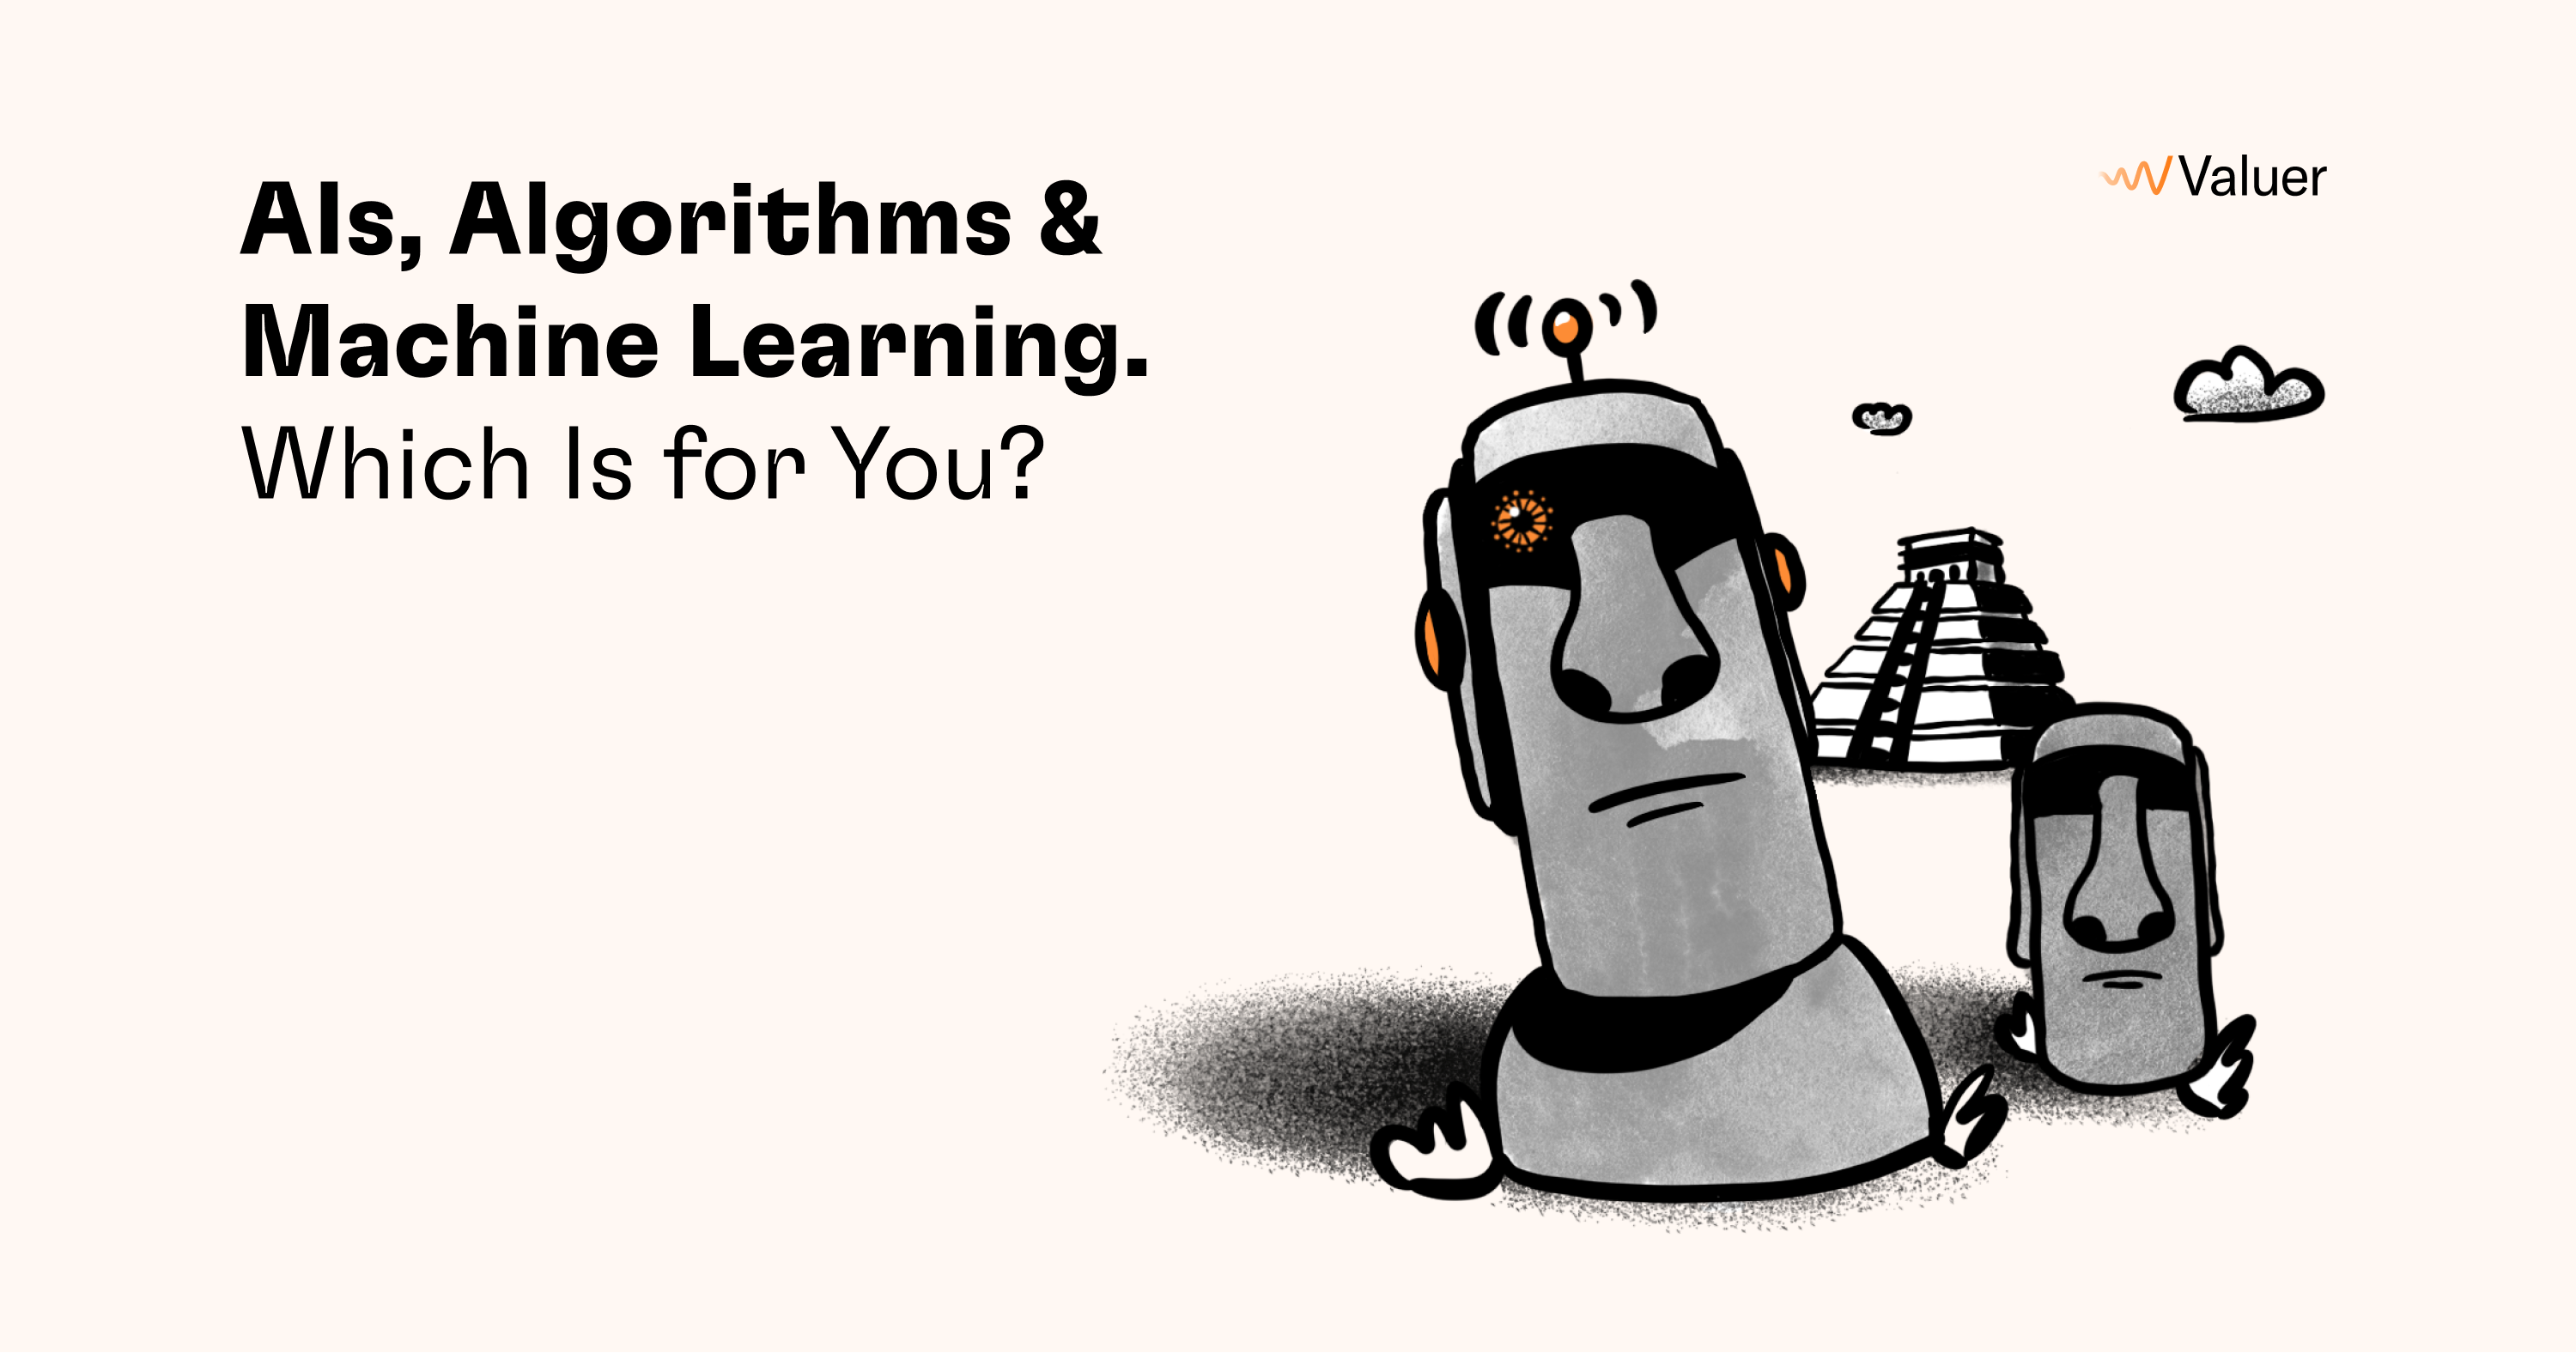 AIs, Algorithms & Machine Learning: Which is For You?